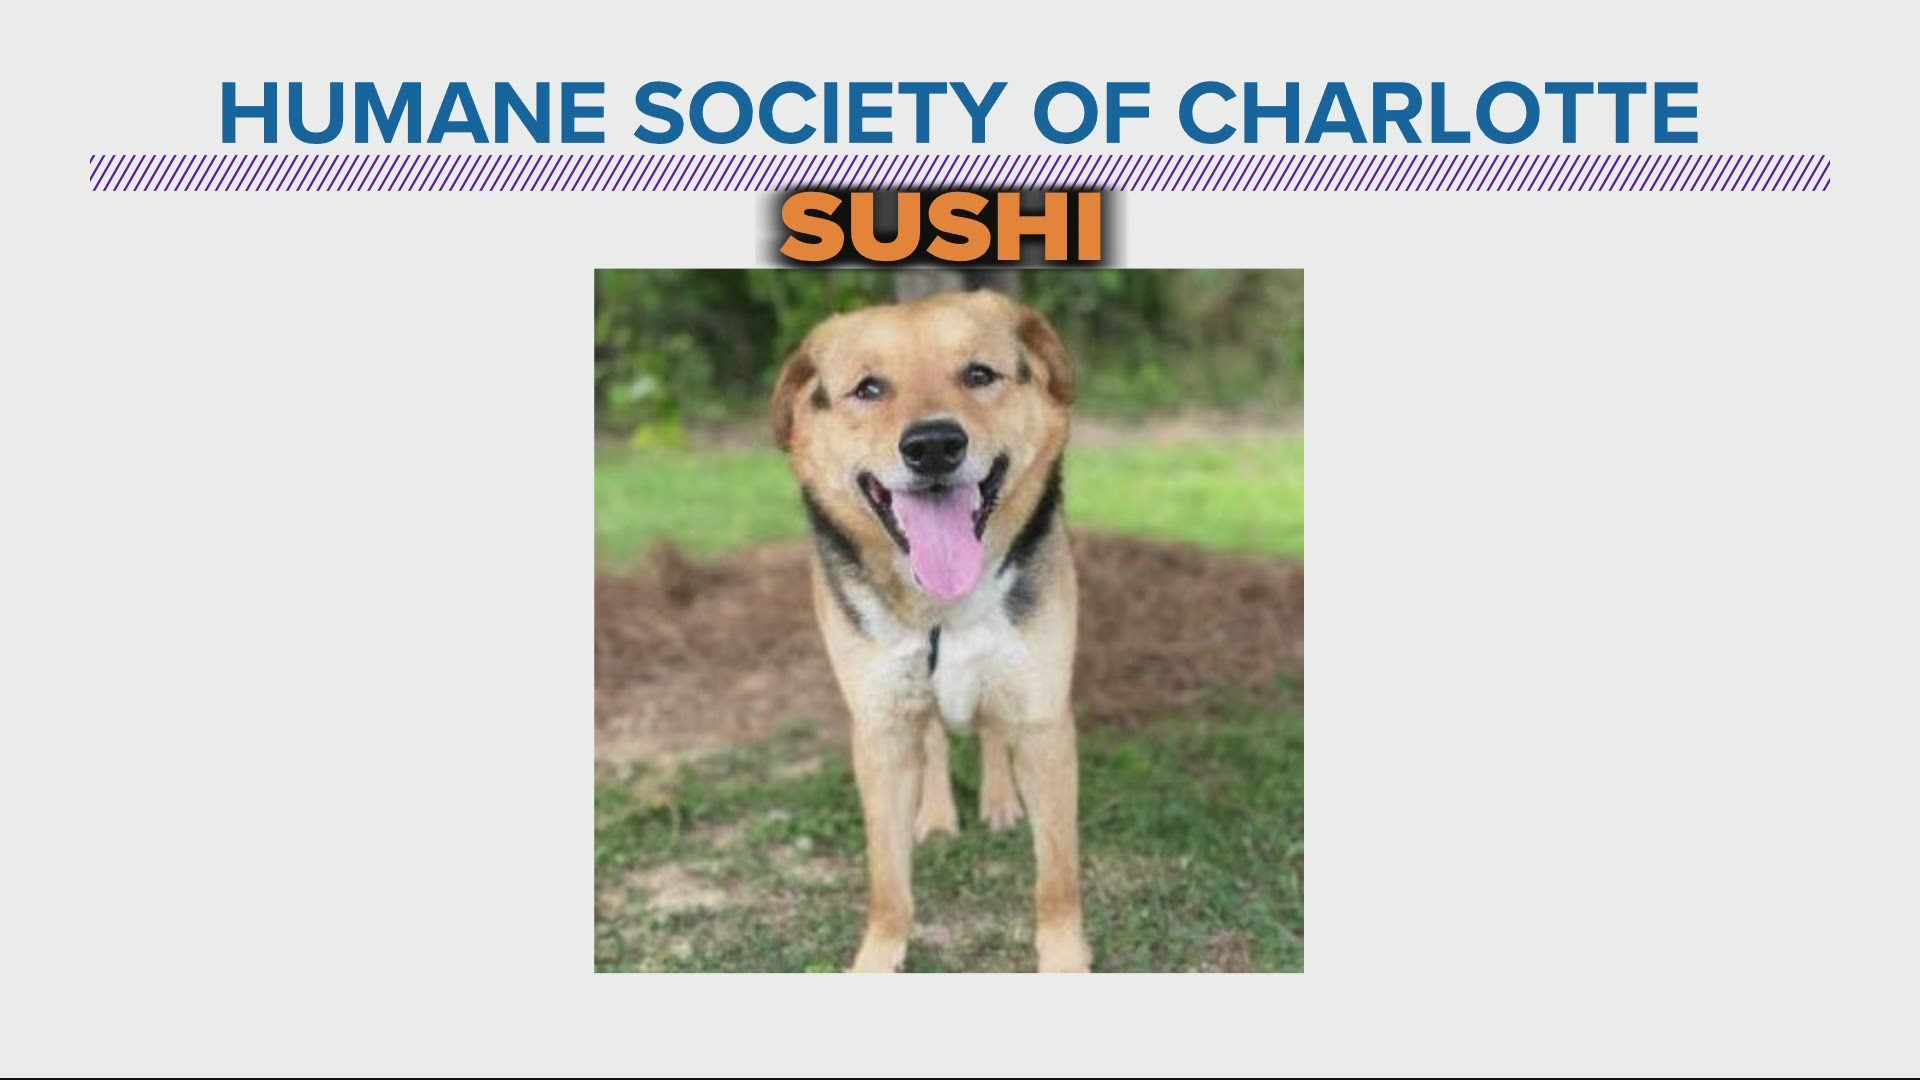 Sushi is about six years old, gets along well with other dogs, and loves people. He is up for adoption through the Humane Society of Charlotte.